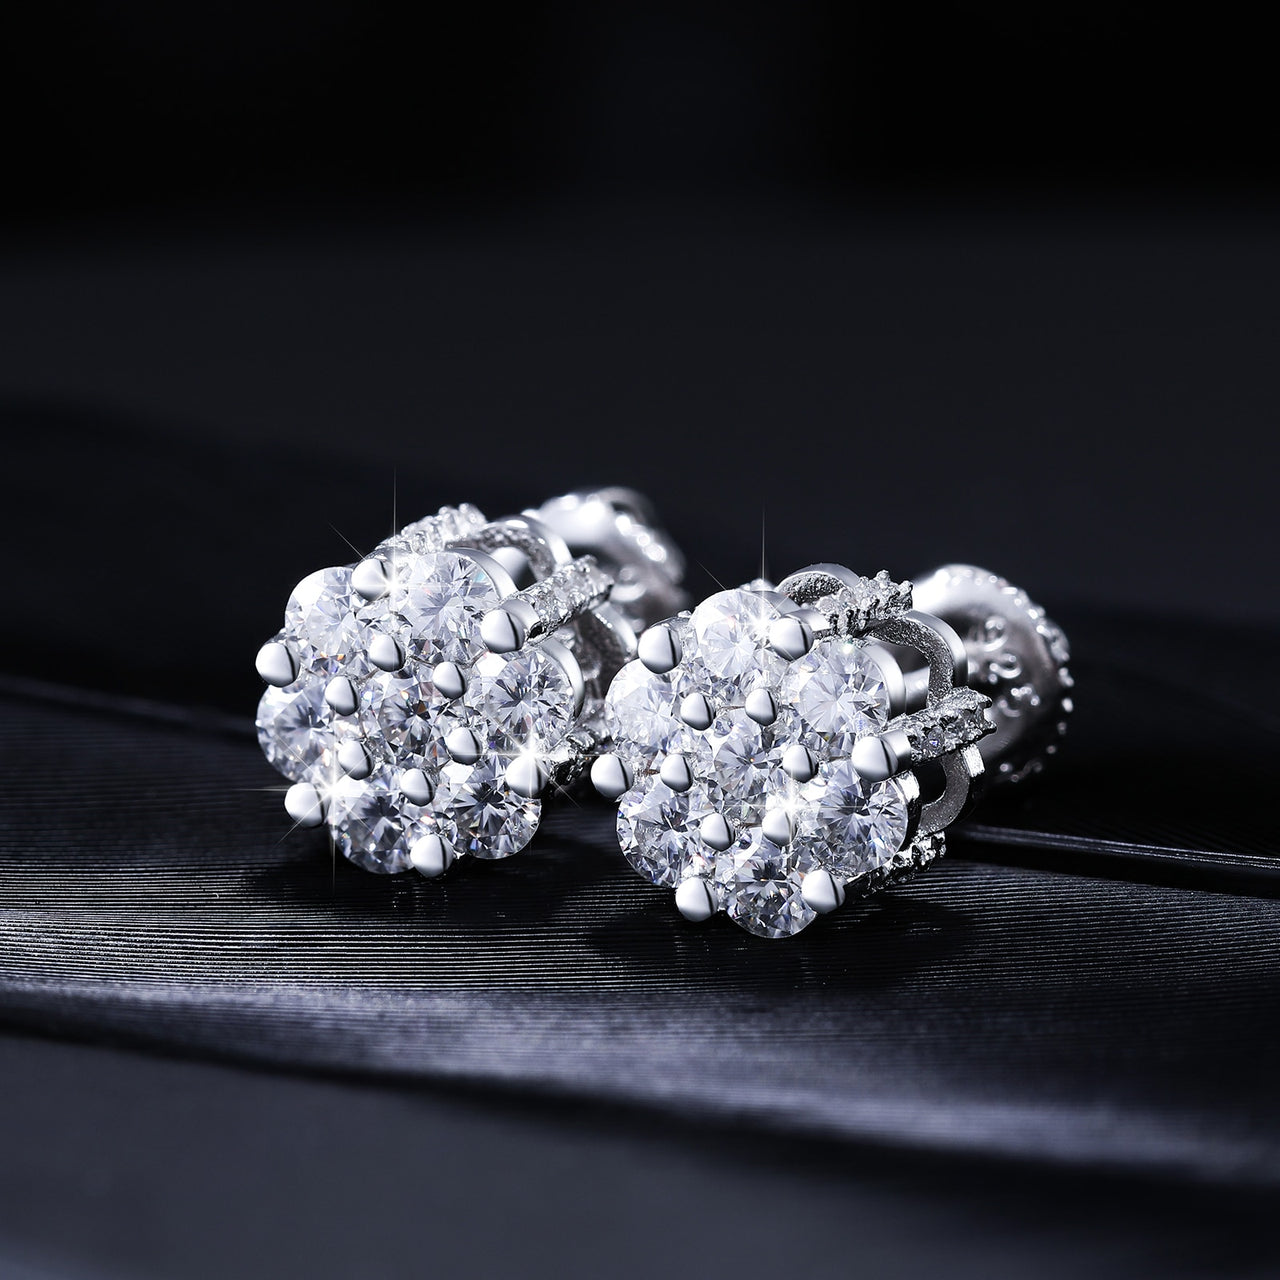 S925 Moissanite Clustered Round Cut Earrings - Different Drips